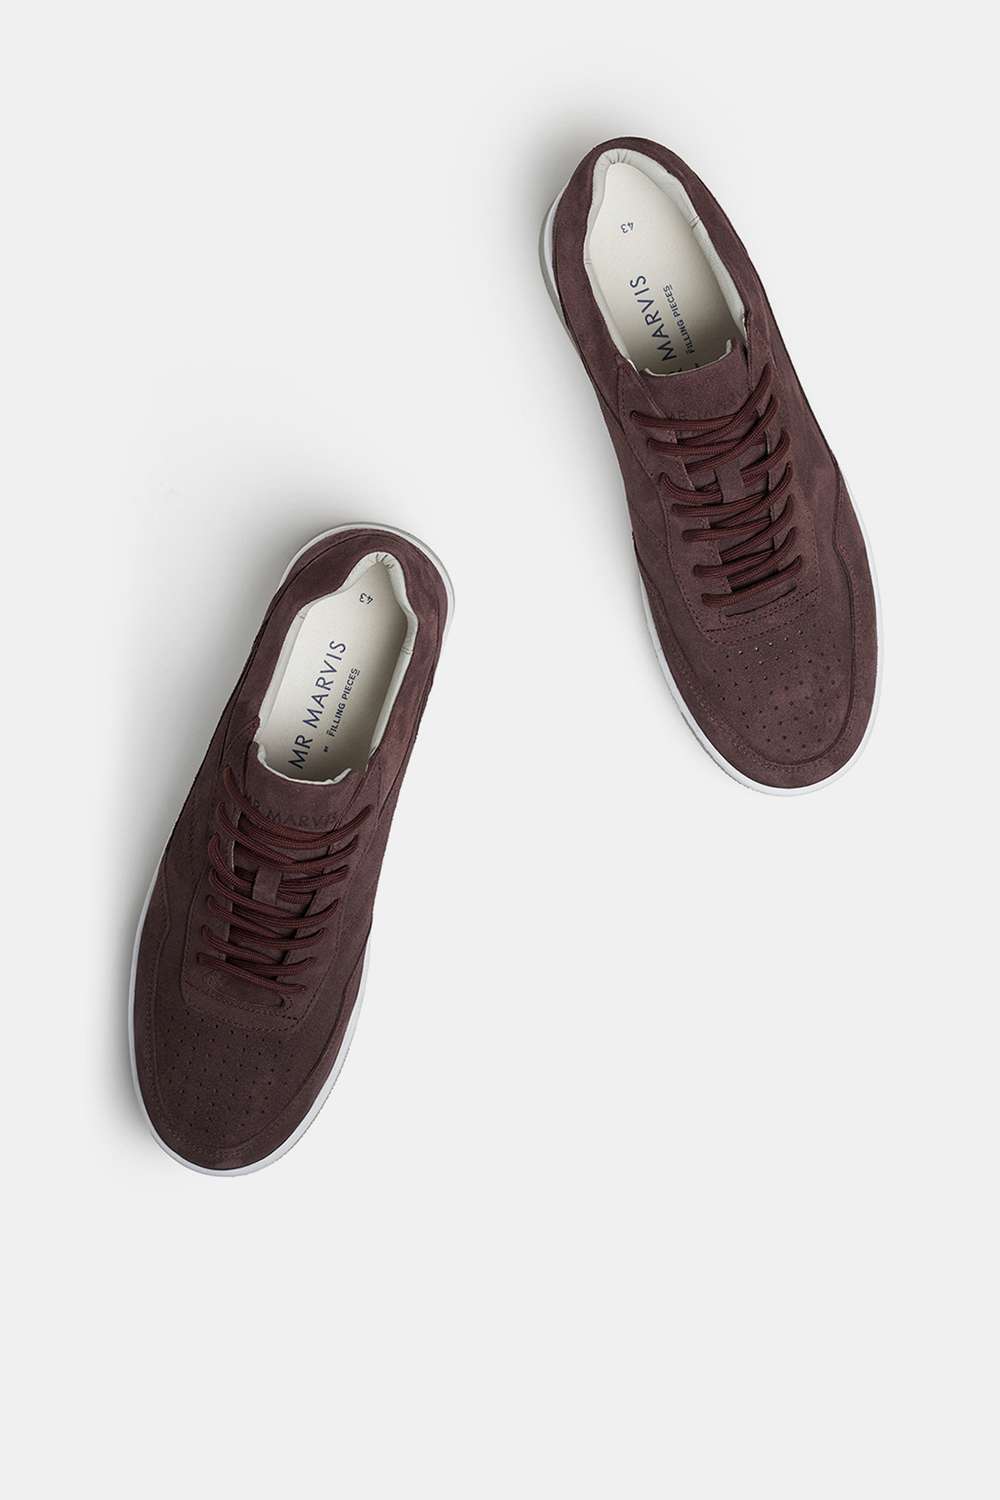 Reserves - The Suede Sneakers